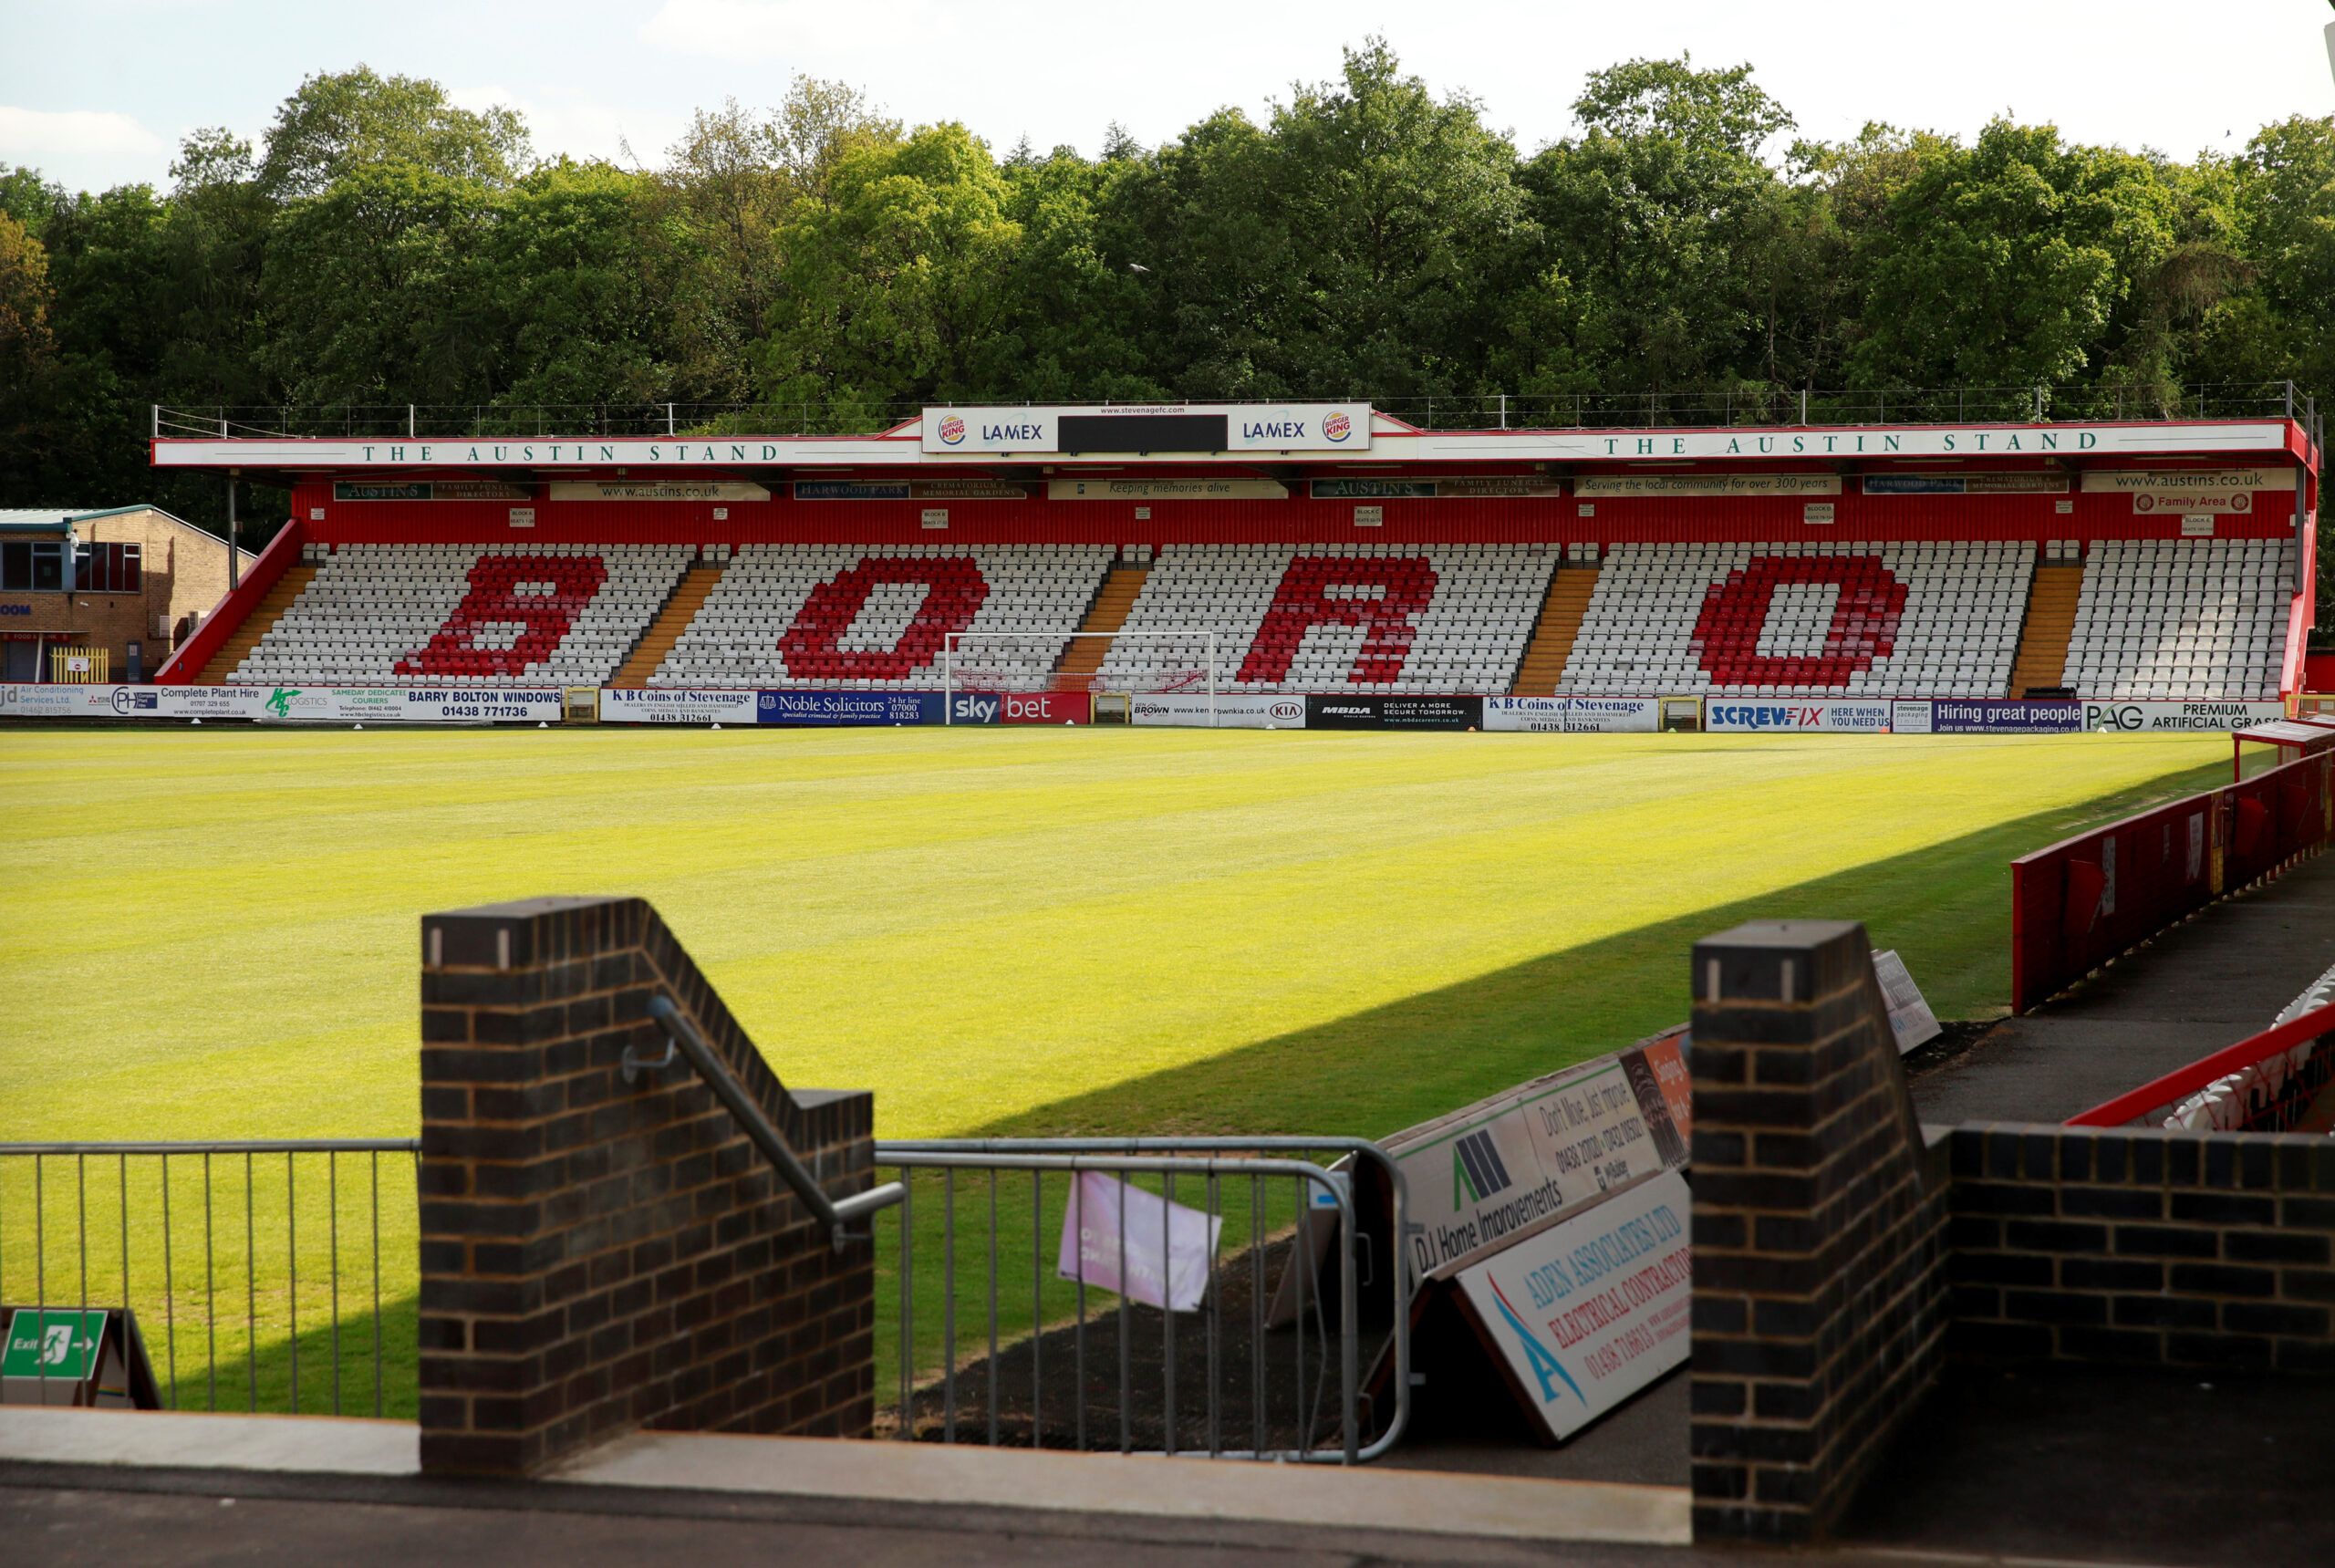 General view at The Lamex Stadium home of Stevenage FC, following the outbreak of the coronavirus disease (COVID-19), Stevenage, Britain, May 15, 2020. REUTERS/Andrew Couldridge